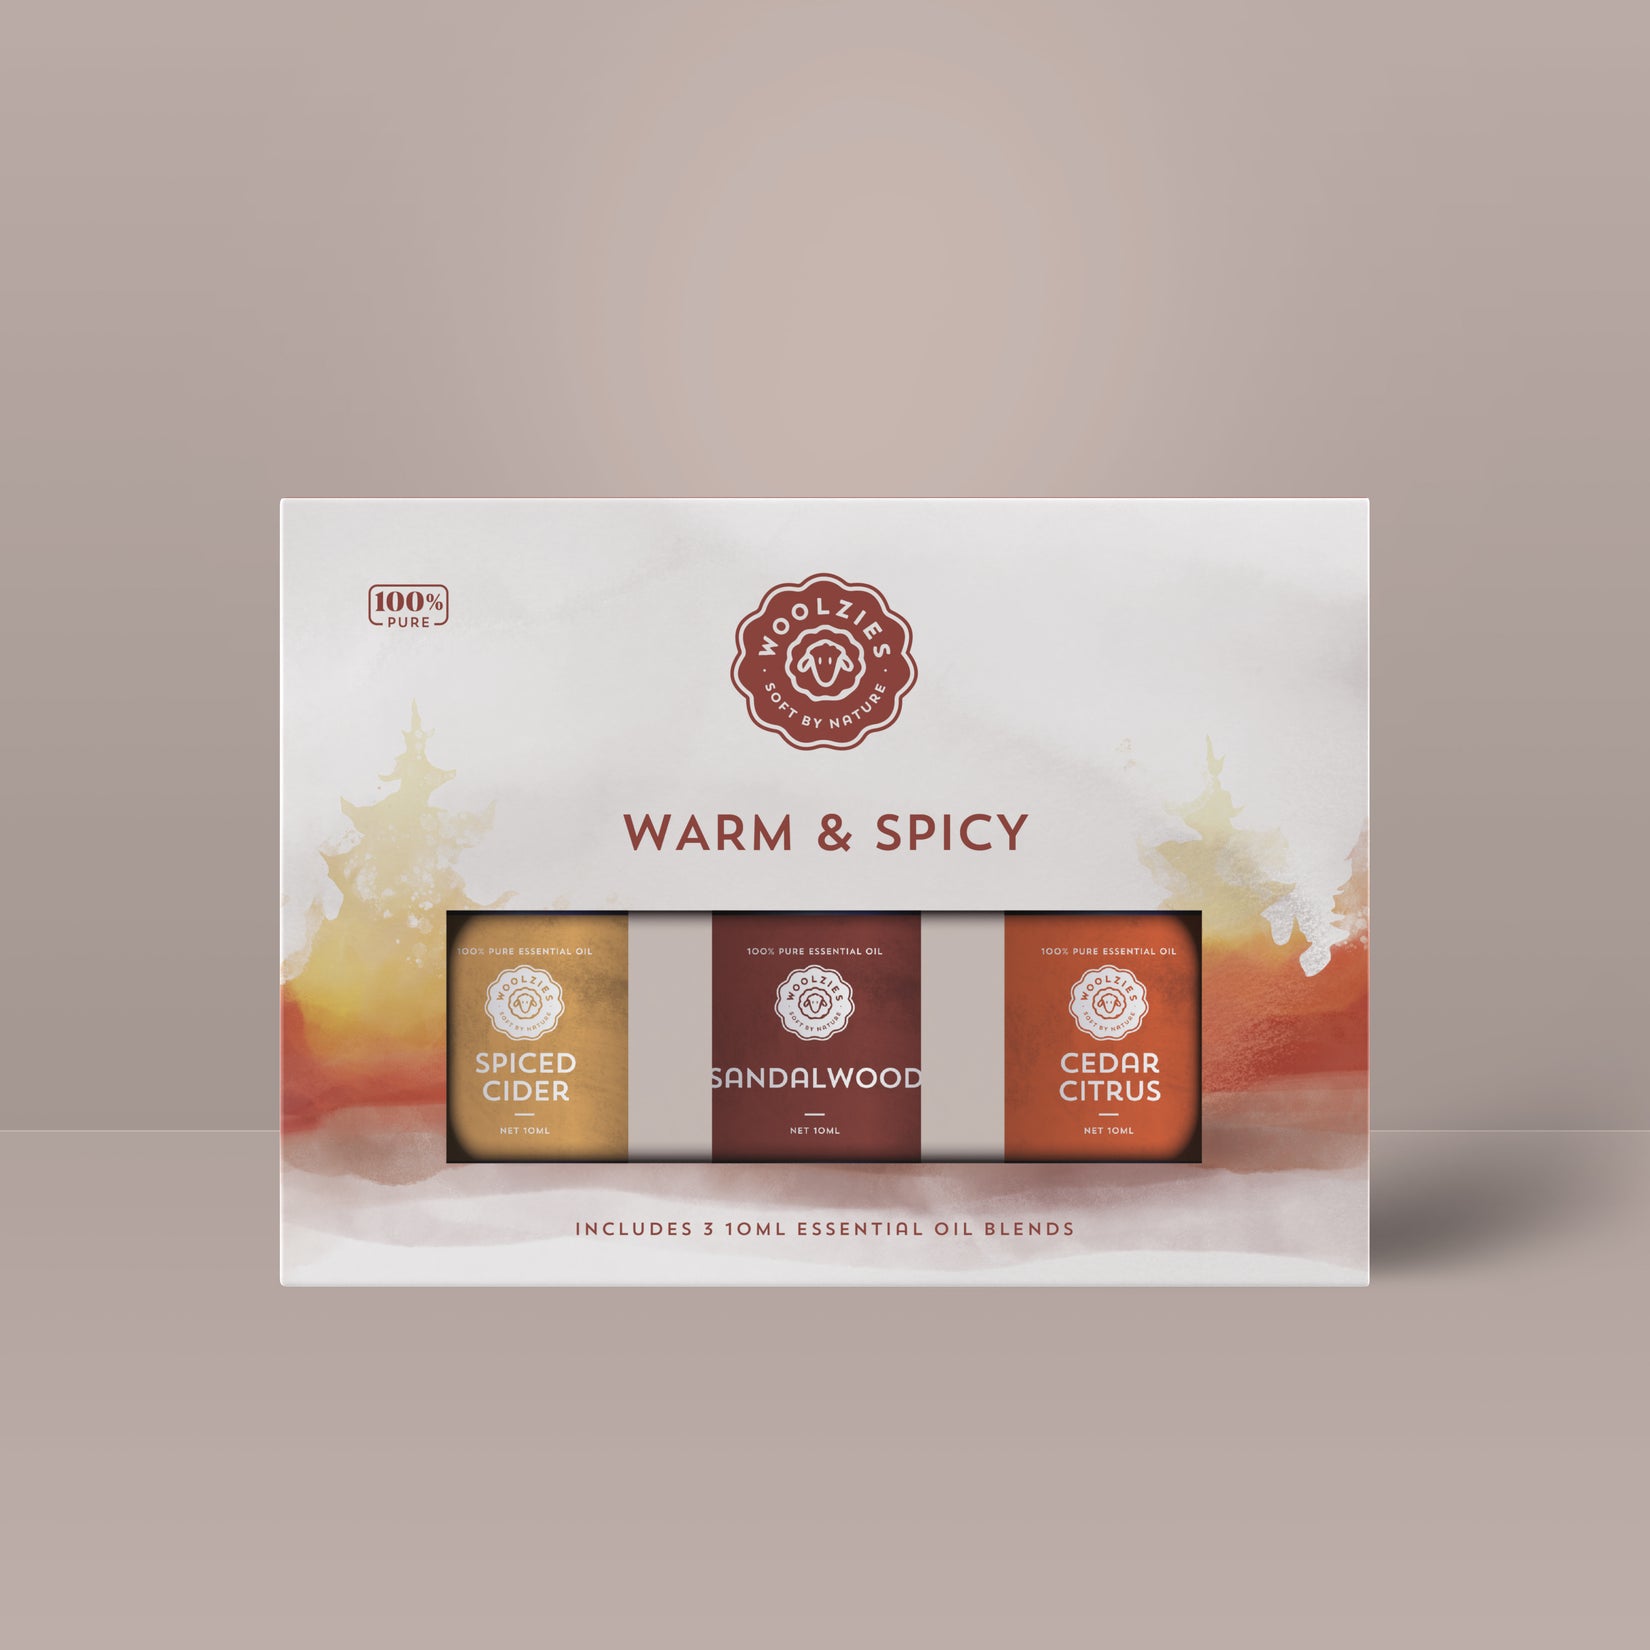 Warm & Spicy Collection